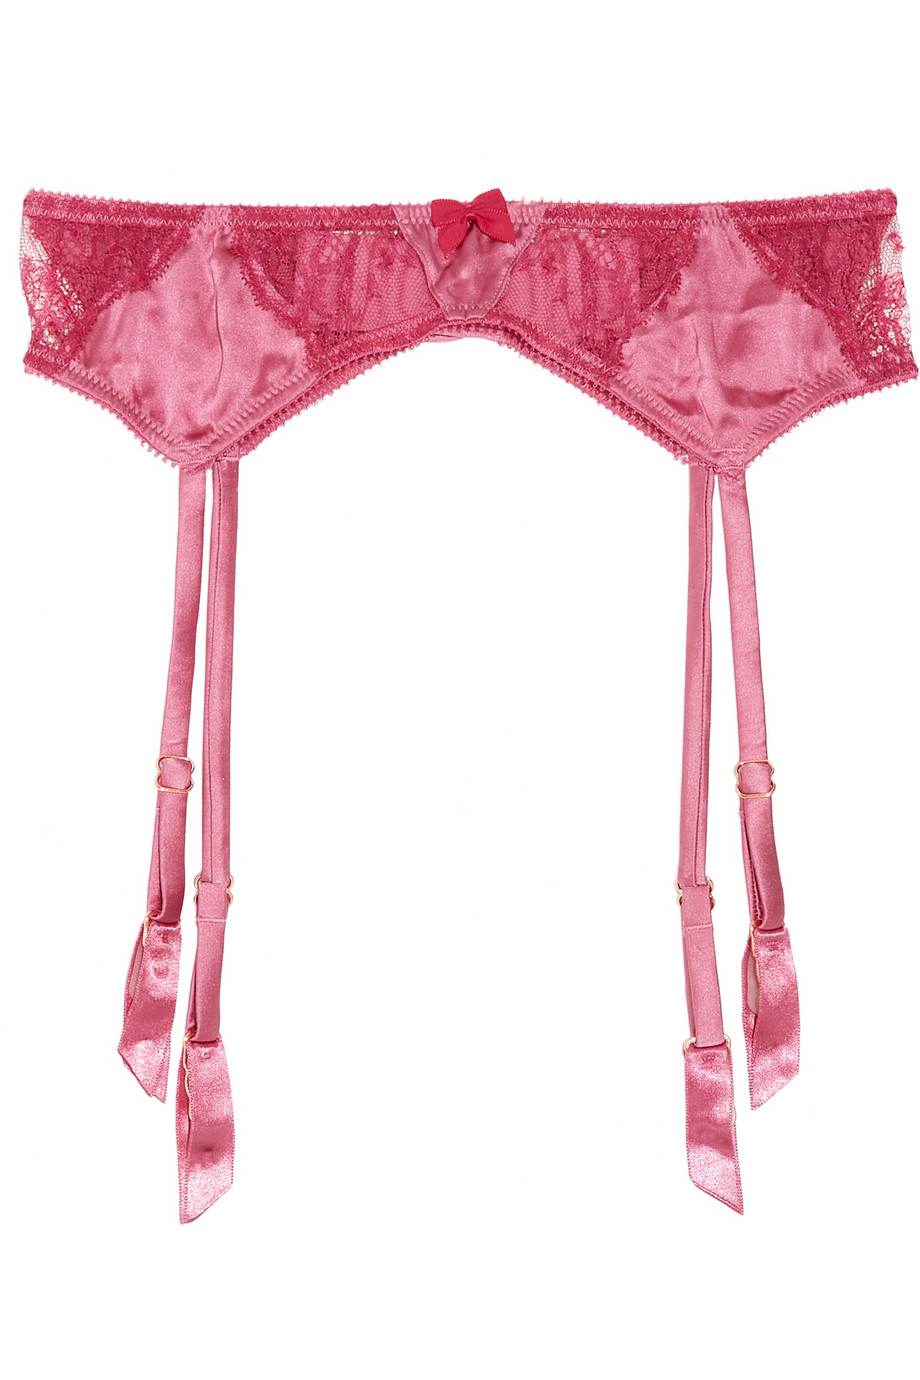 Myla Angelica Lace and Satin Suspender Belt in Pink | Lyst